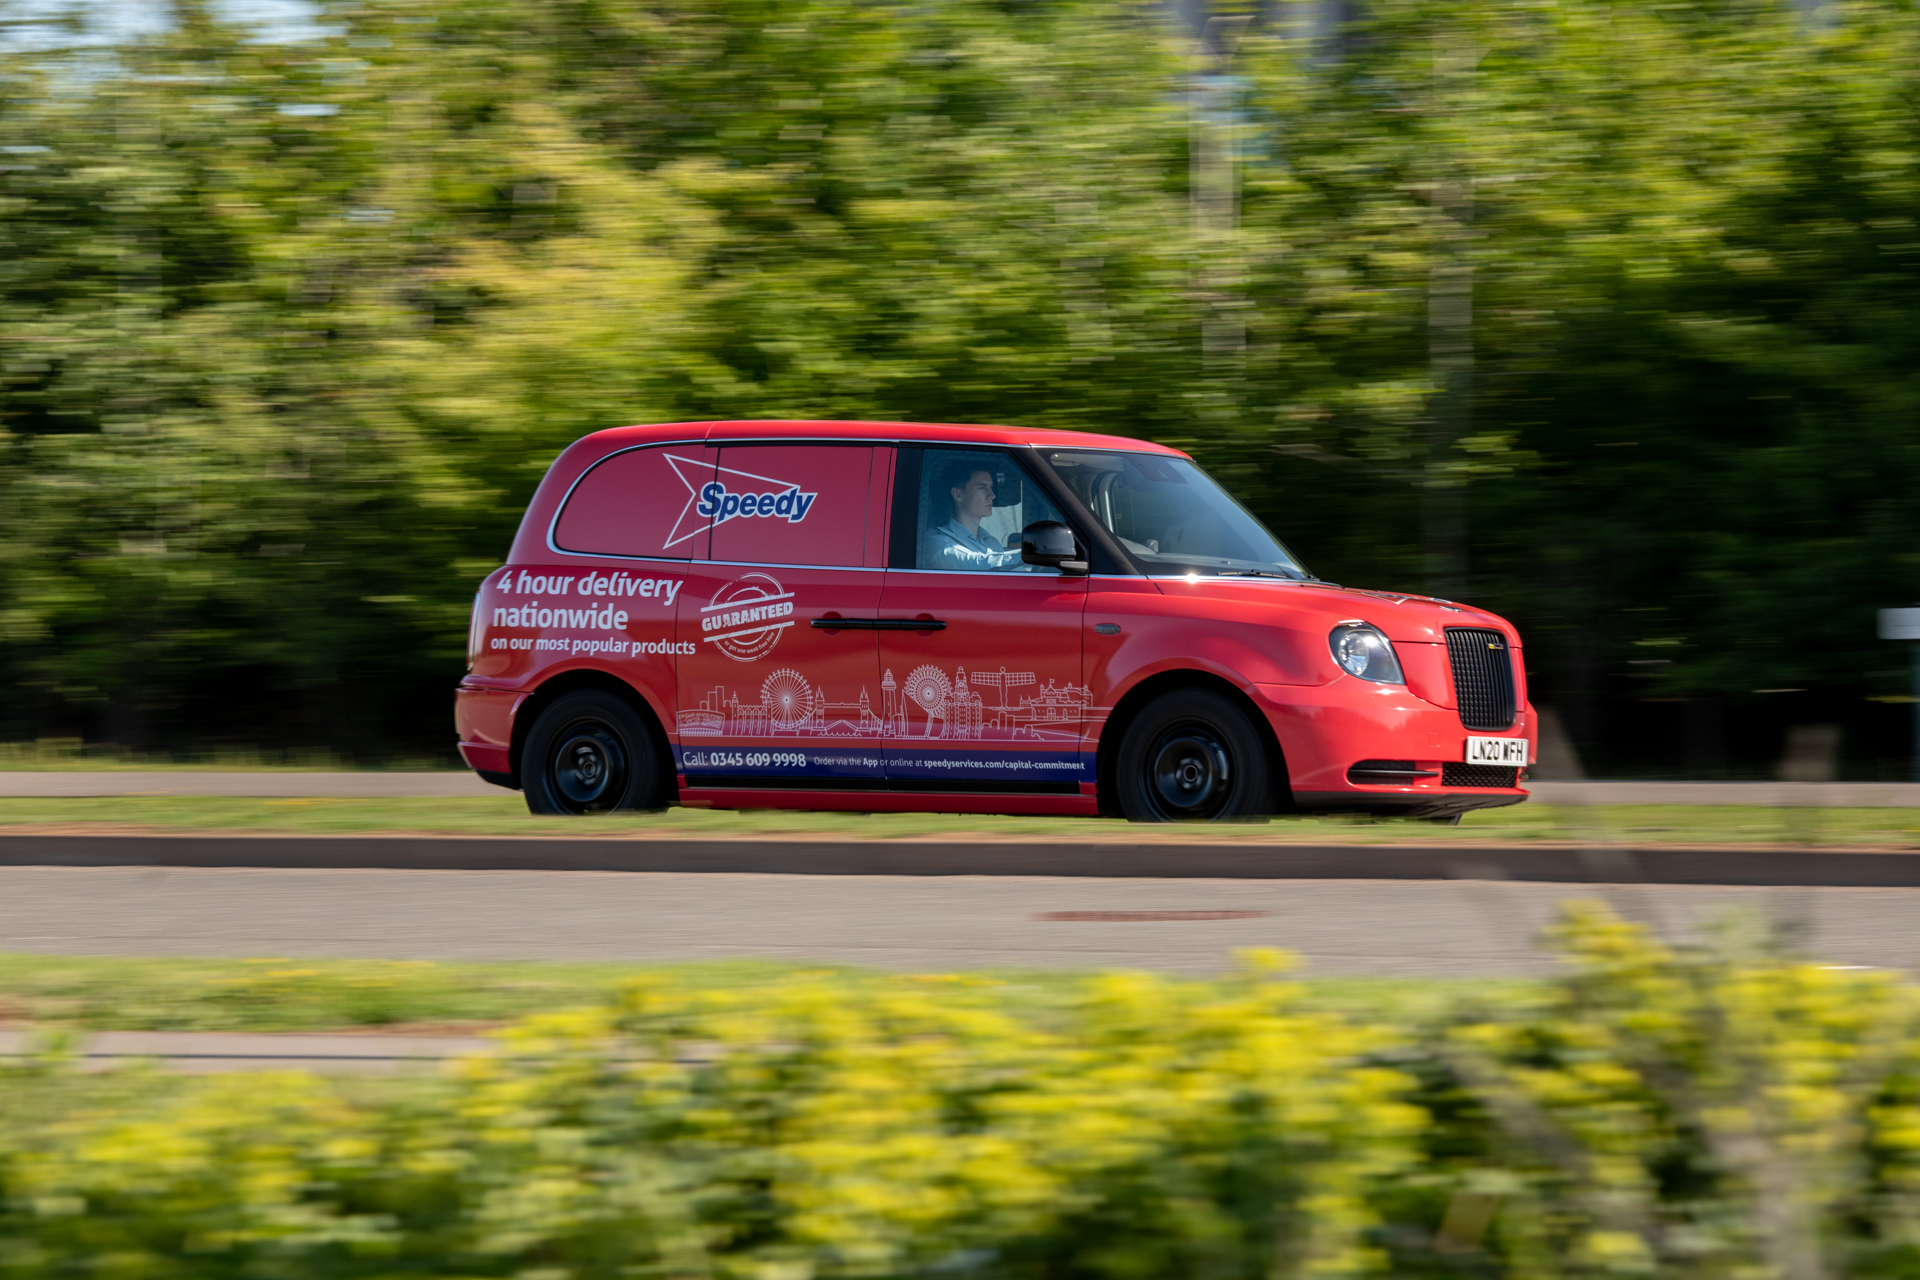 And finally... Speedy Hire trials new electric van